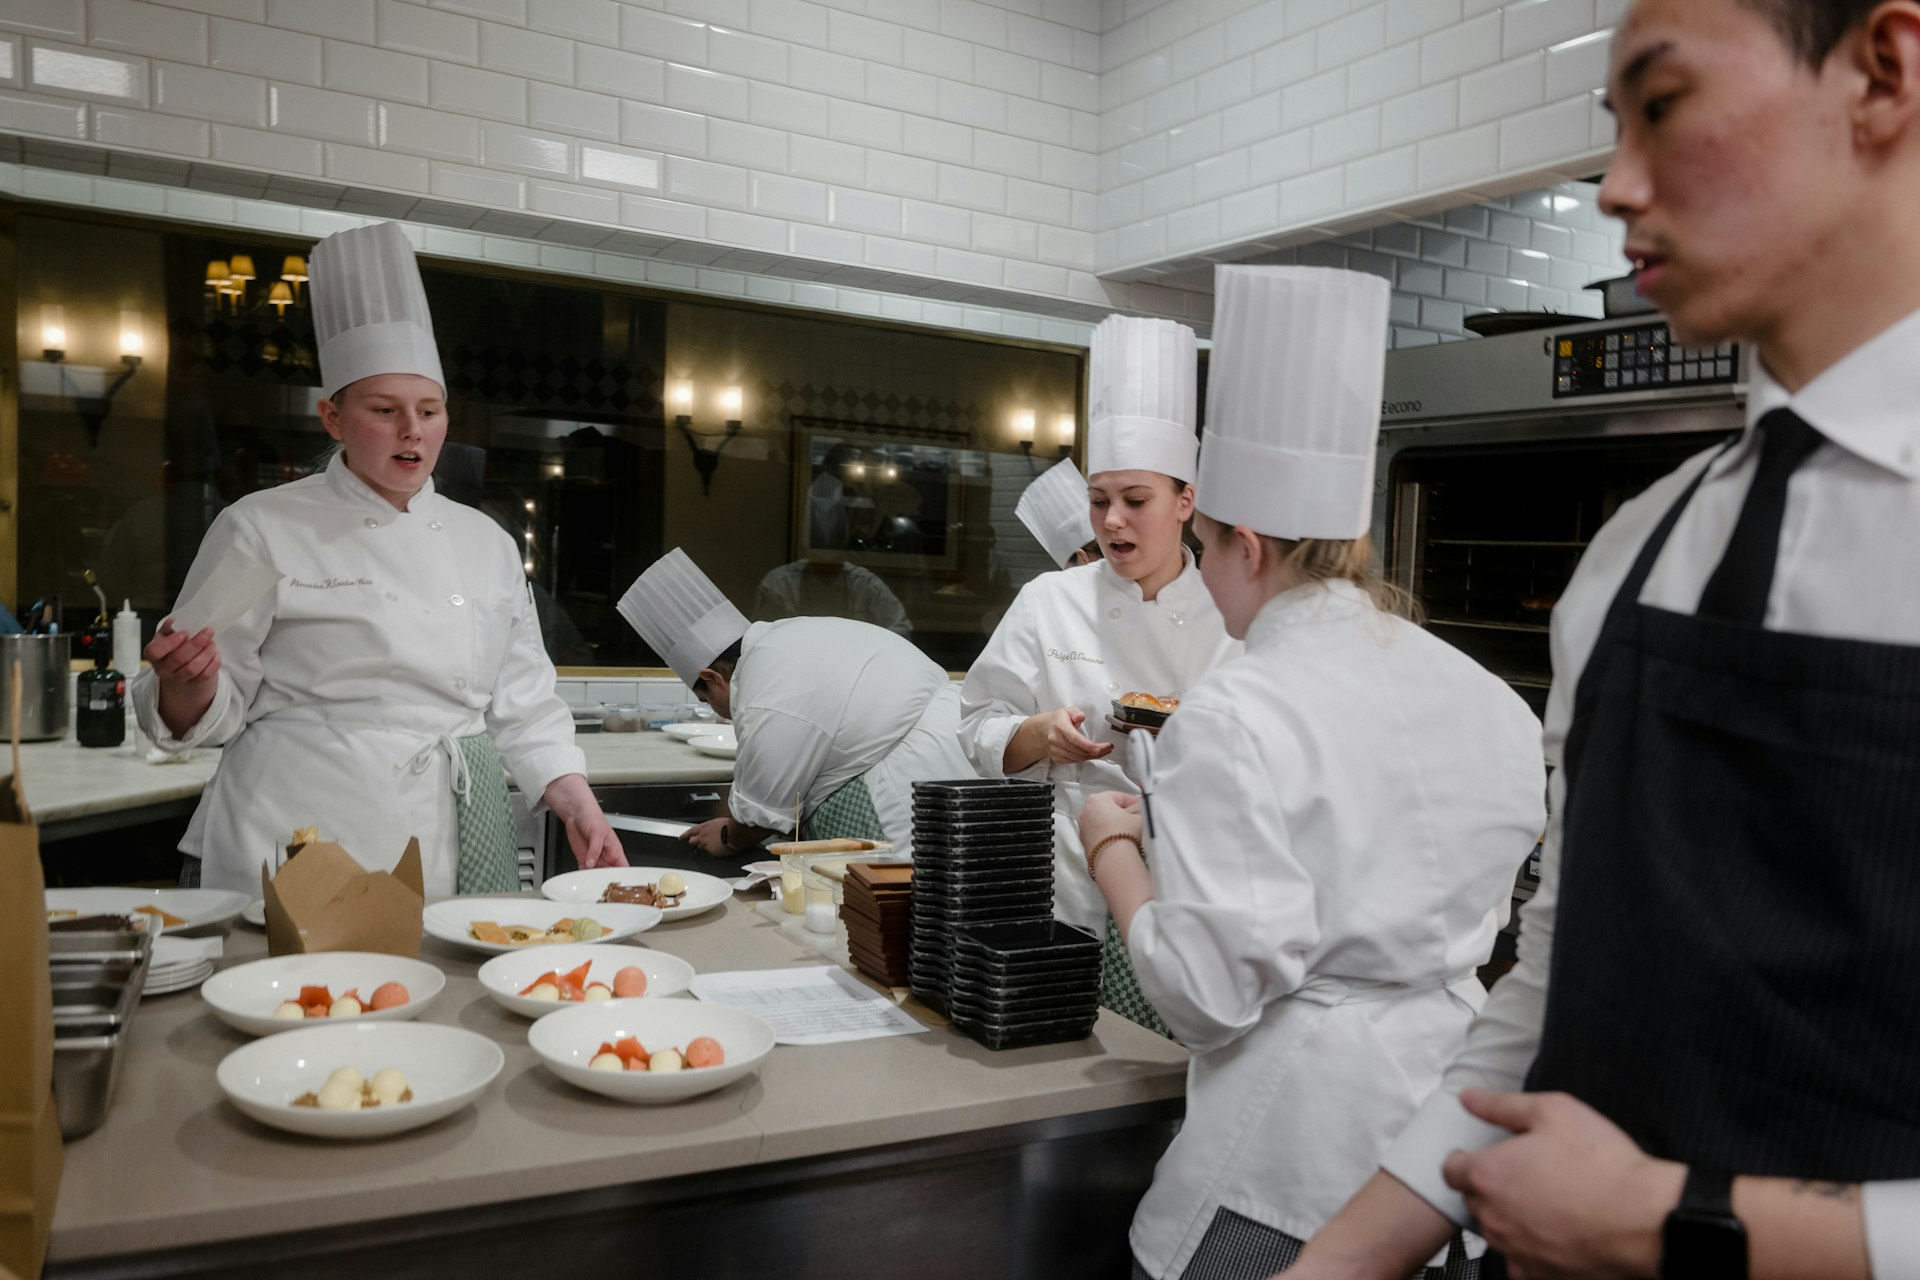 Staff in the kitchen at the Culinary Institute of America